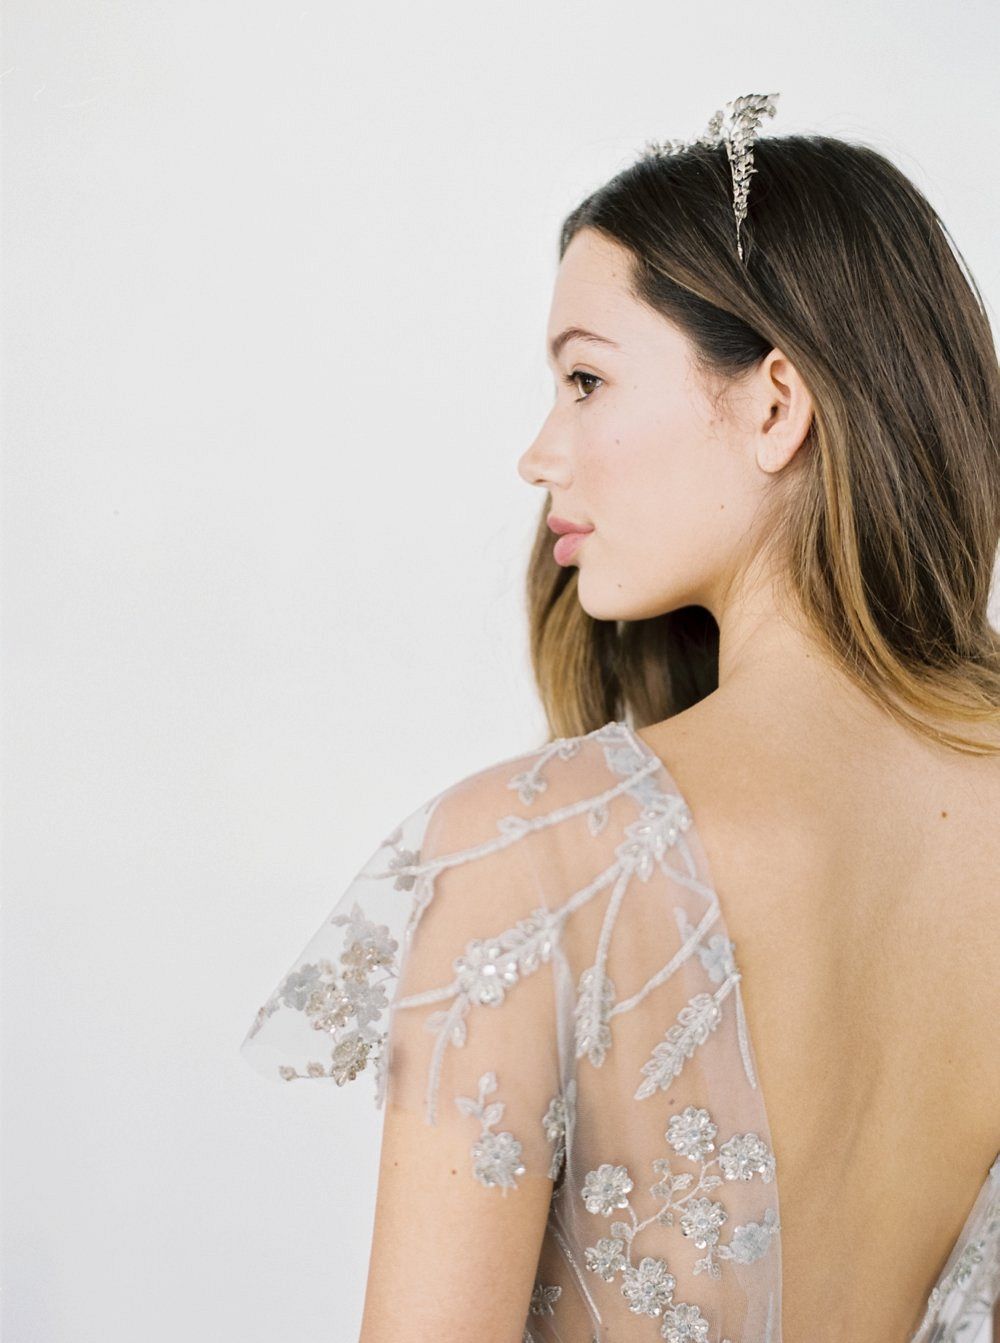 Handmade Wedding Gowns with Floral Appliqué by Gossamer